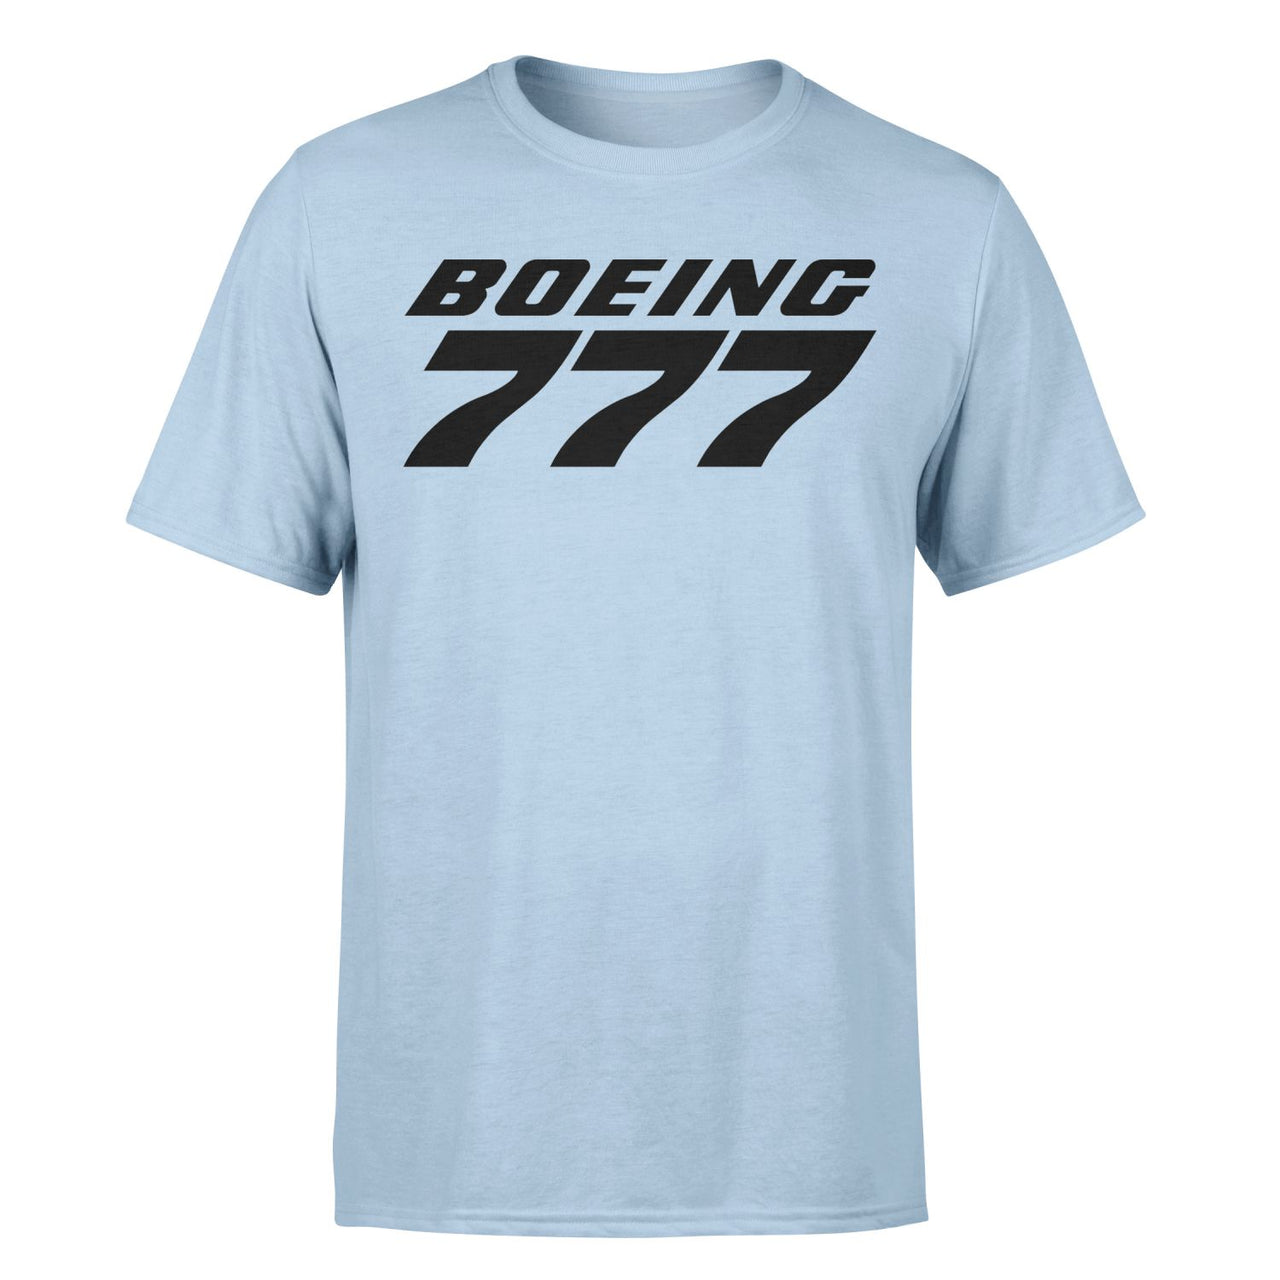 Boeing 777 & Text Designed T-Shirts